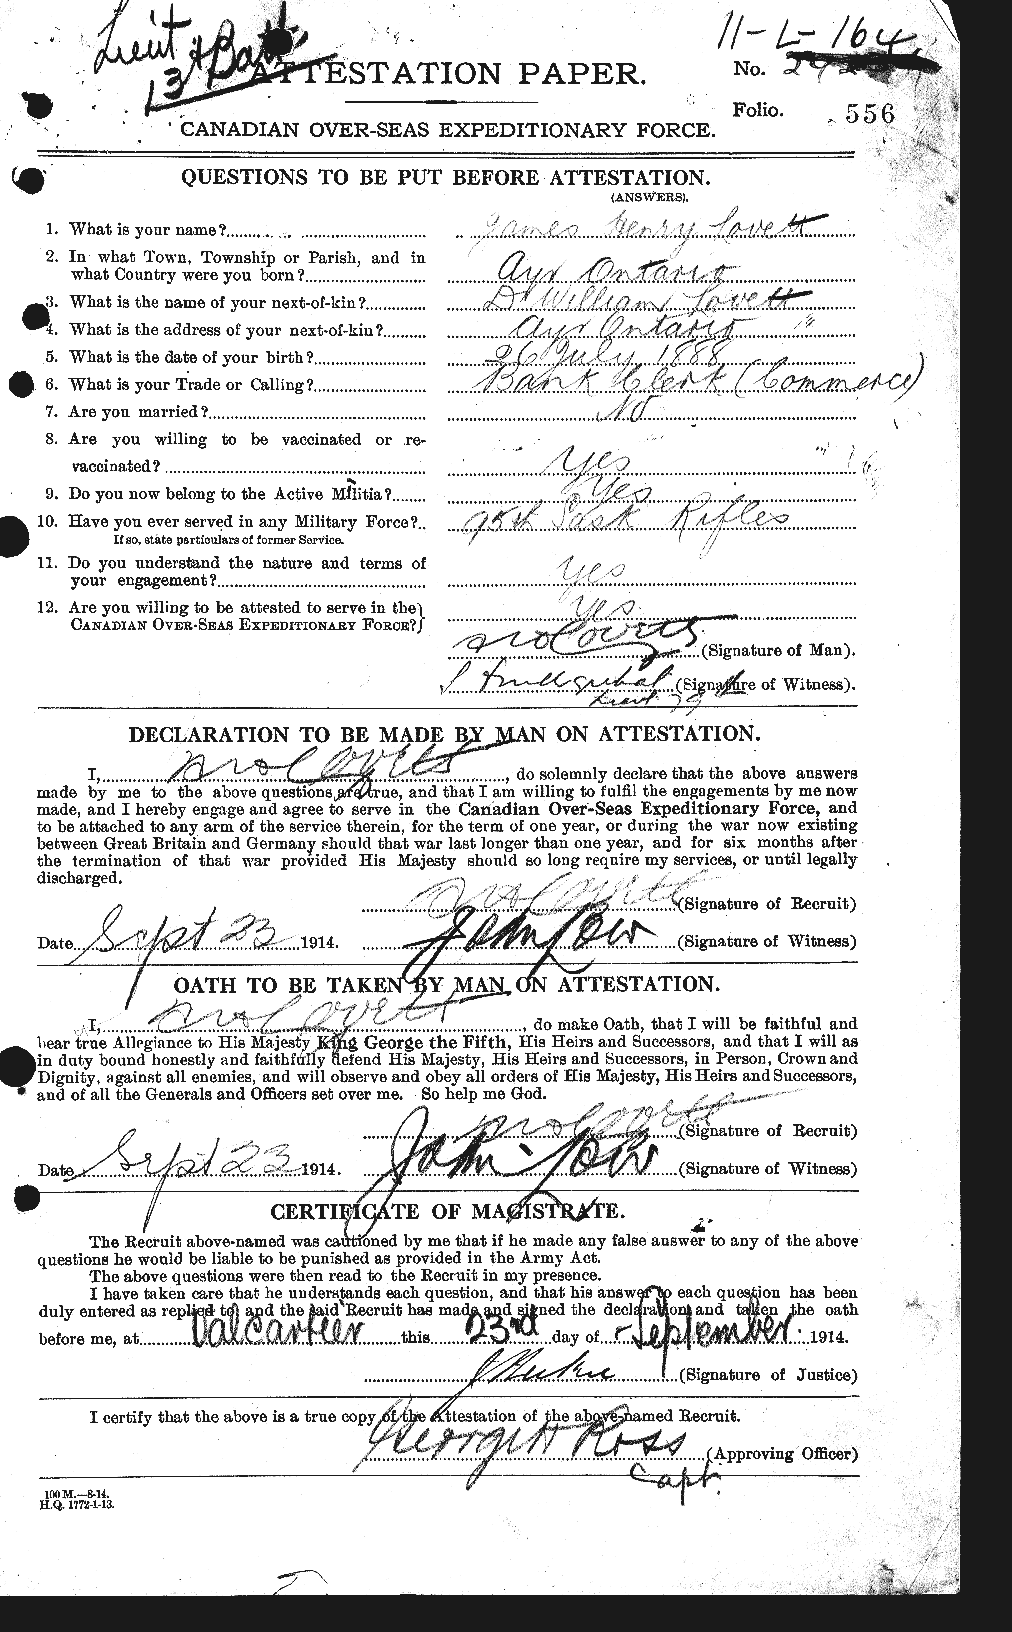 Personnel Records of the First World War - CEF 475498a